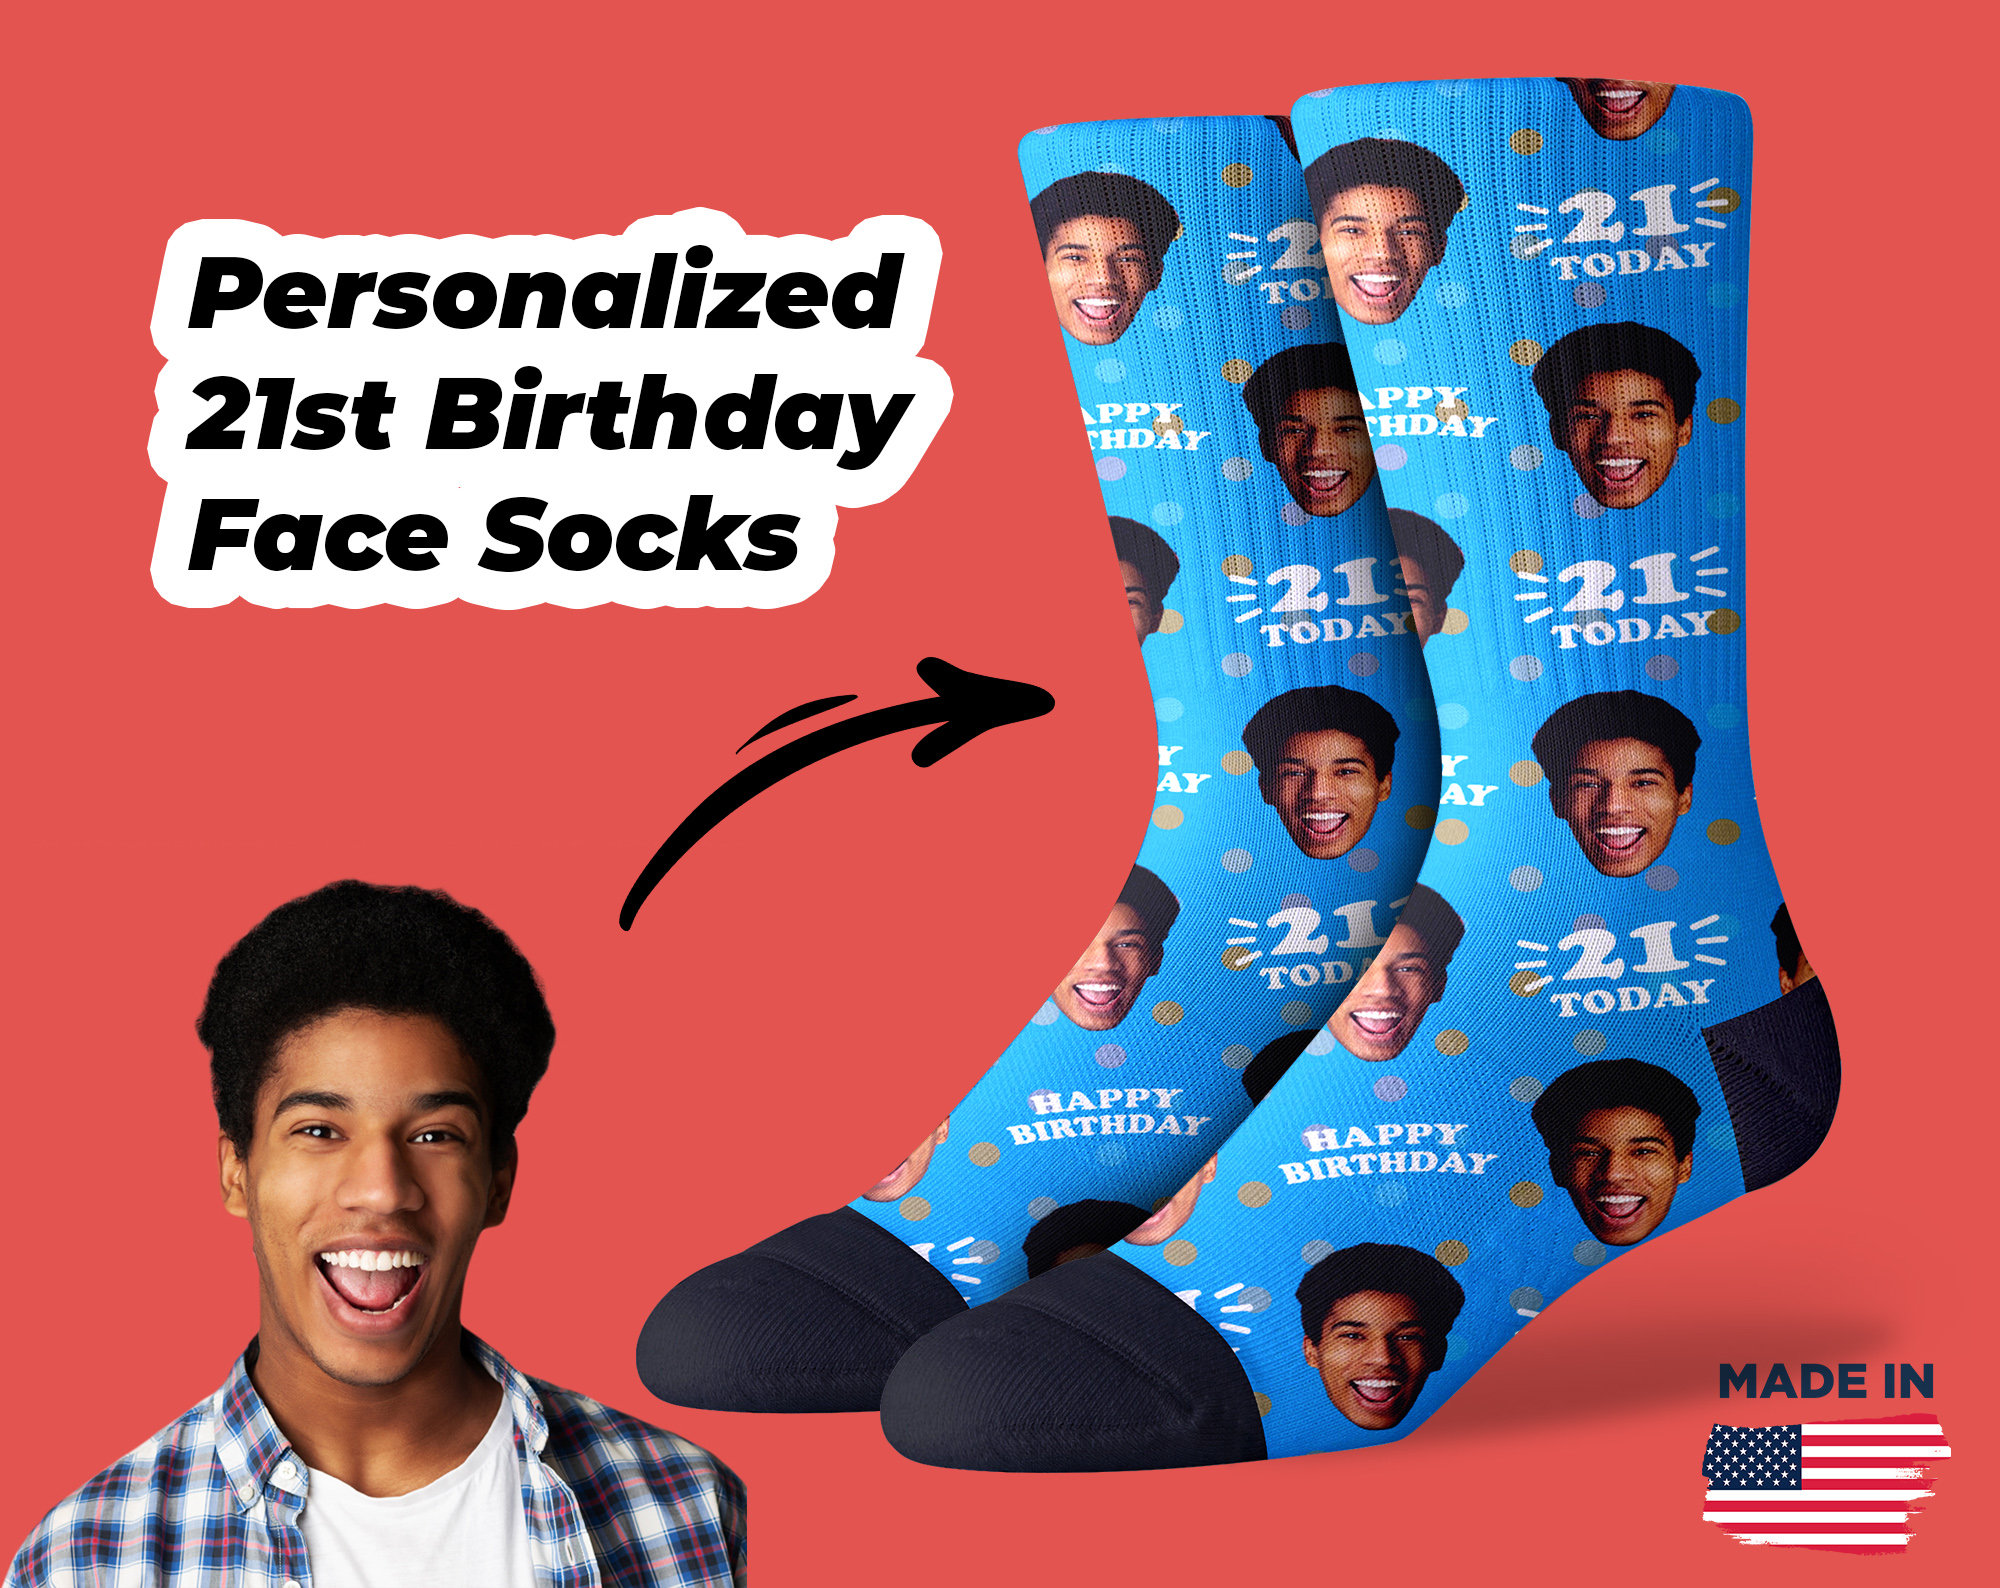 10. 21st Birthday Personalized Face Socks